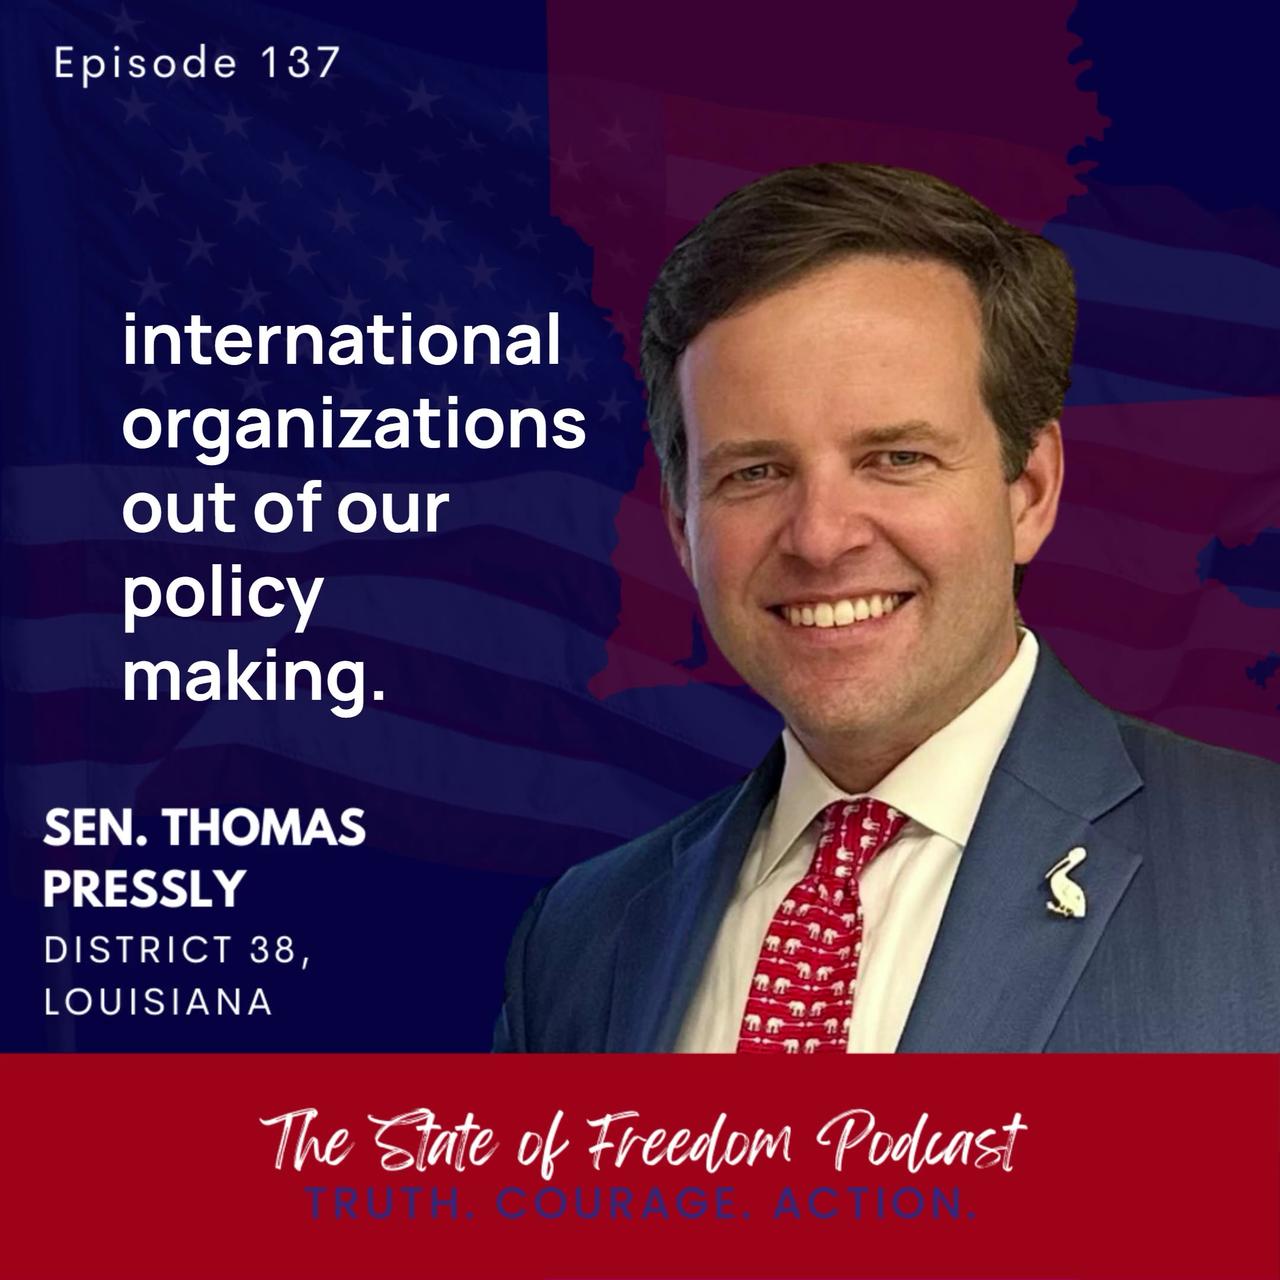 Sen. Thomas Pressly on protecting LA citizens from the UN, WHO & other international orgs